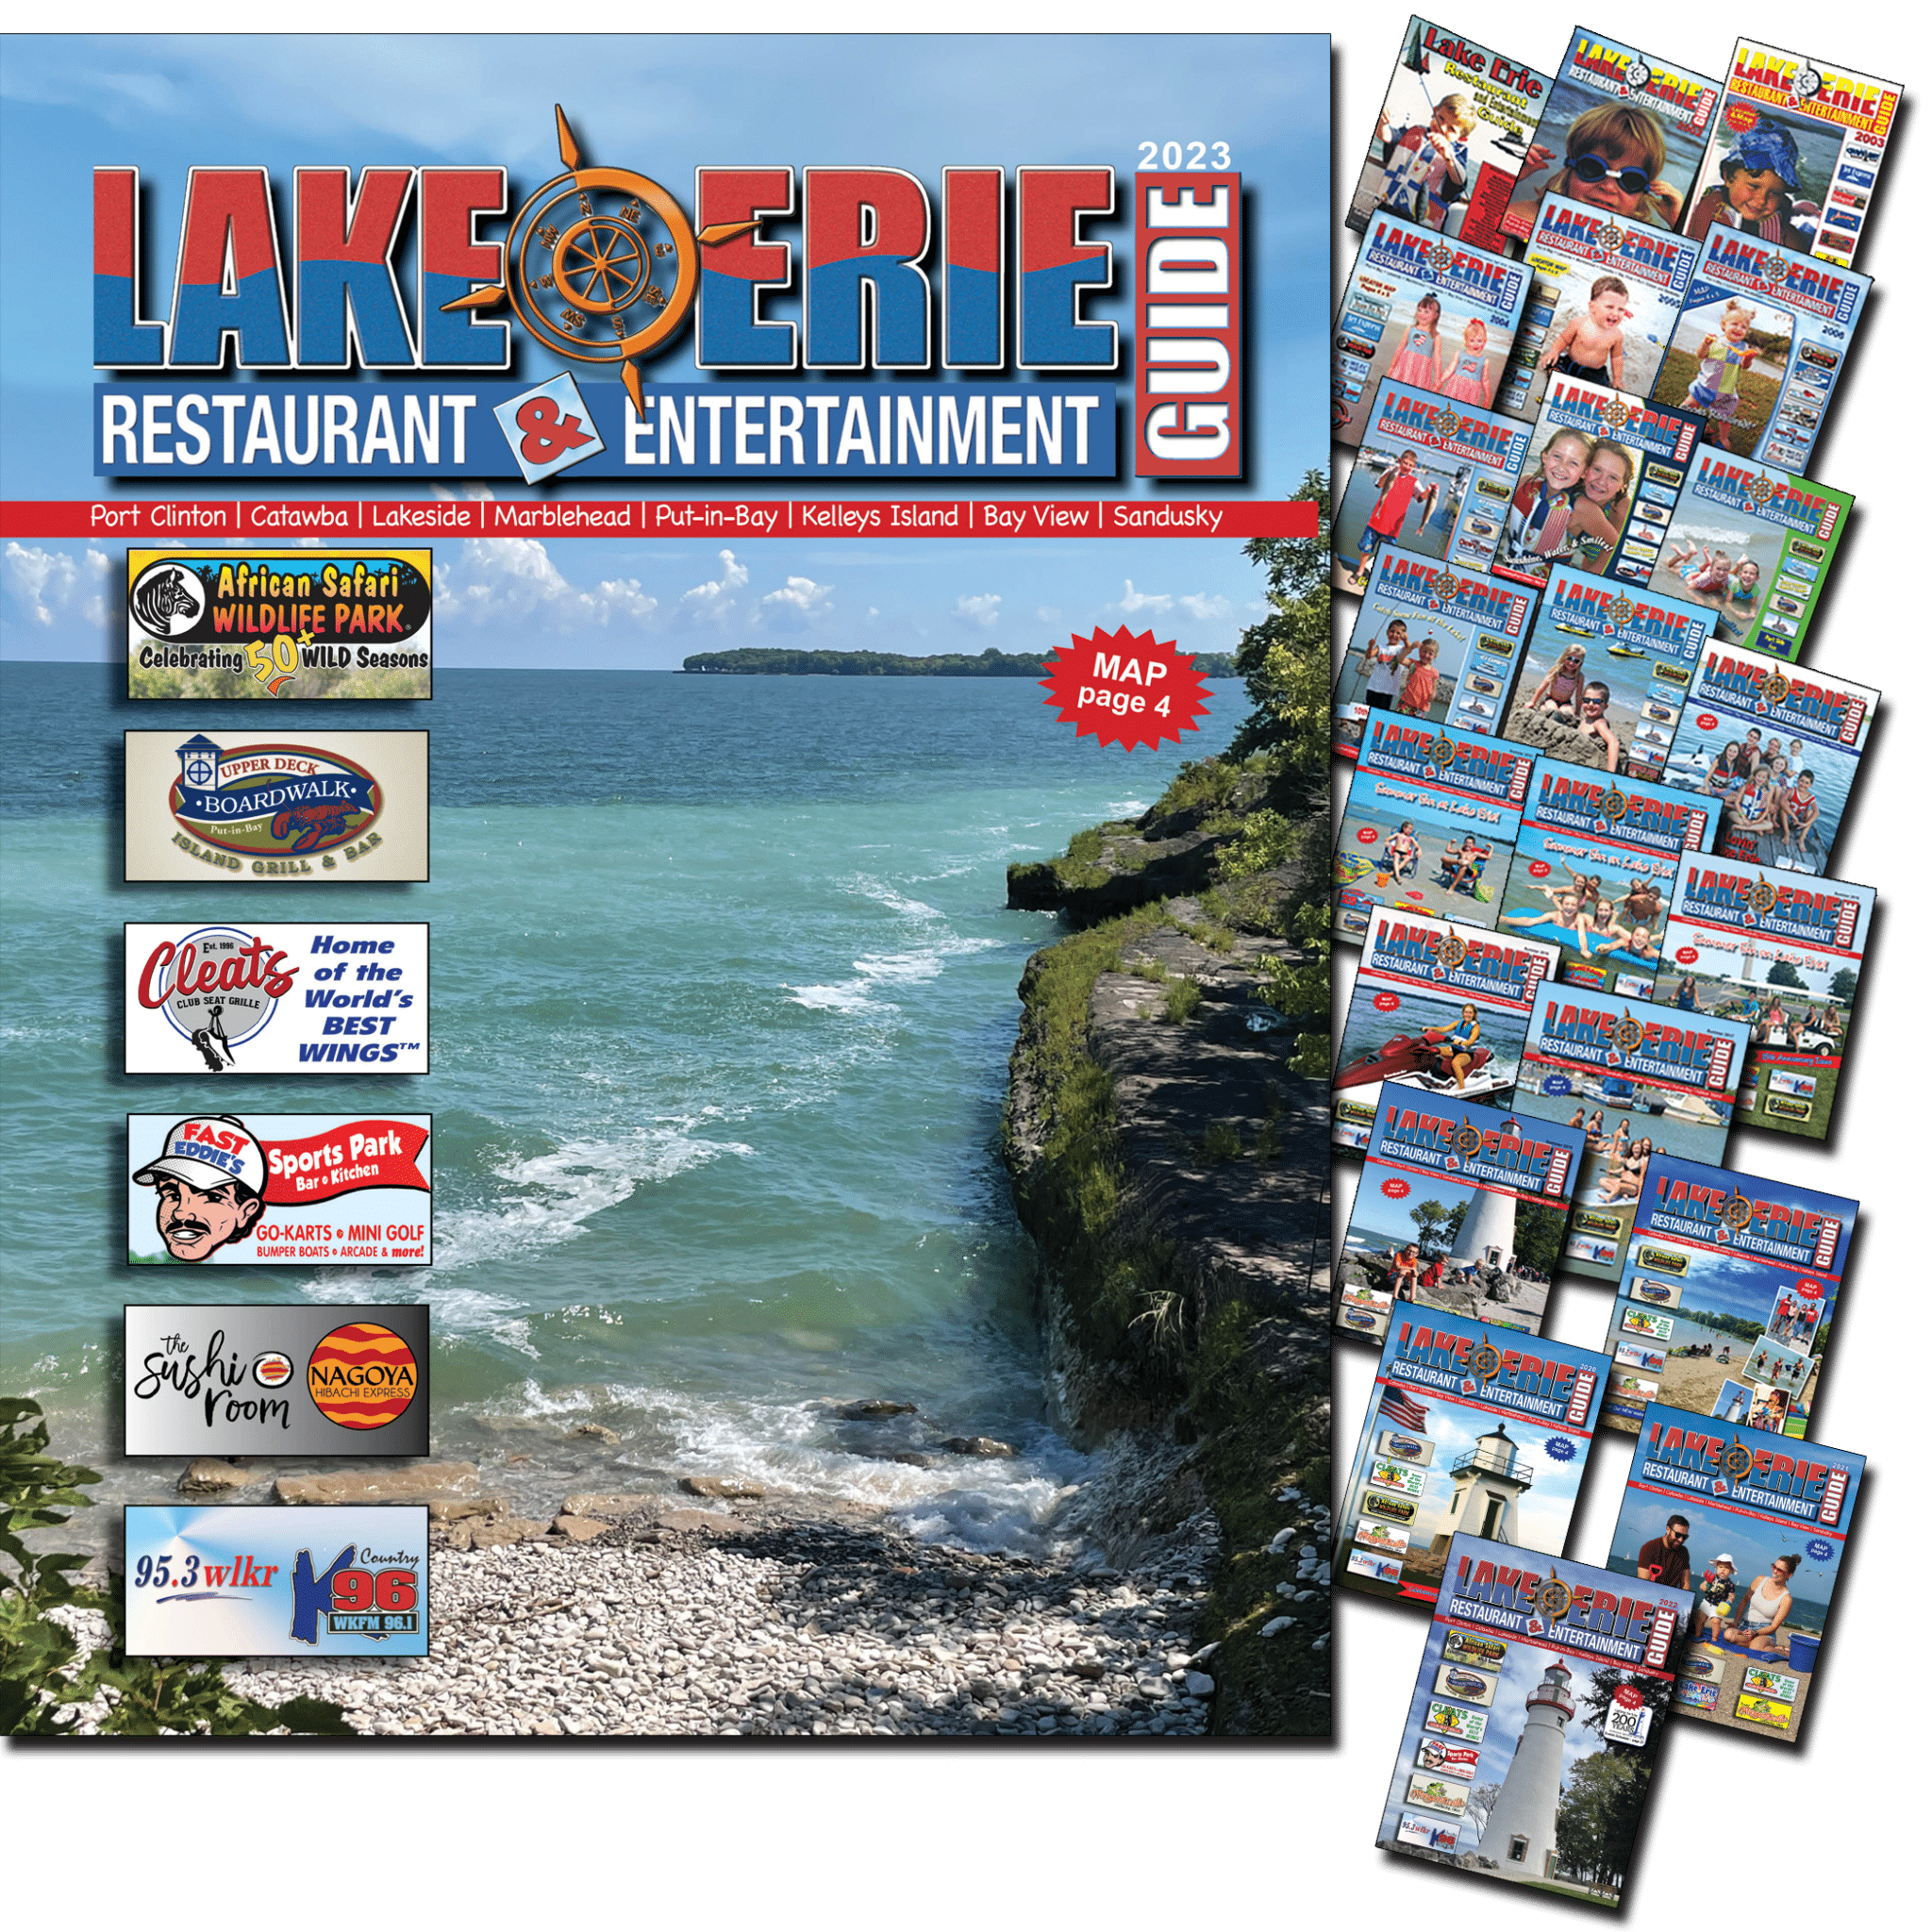 to Vacationland! Lake Erie Restaurant and Entertainment Guide